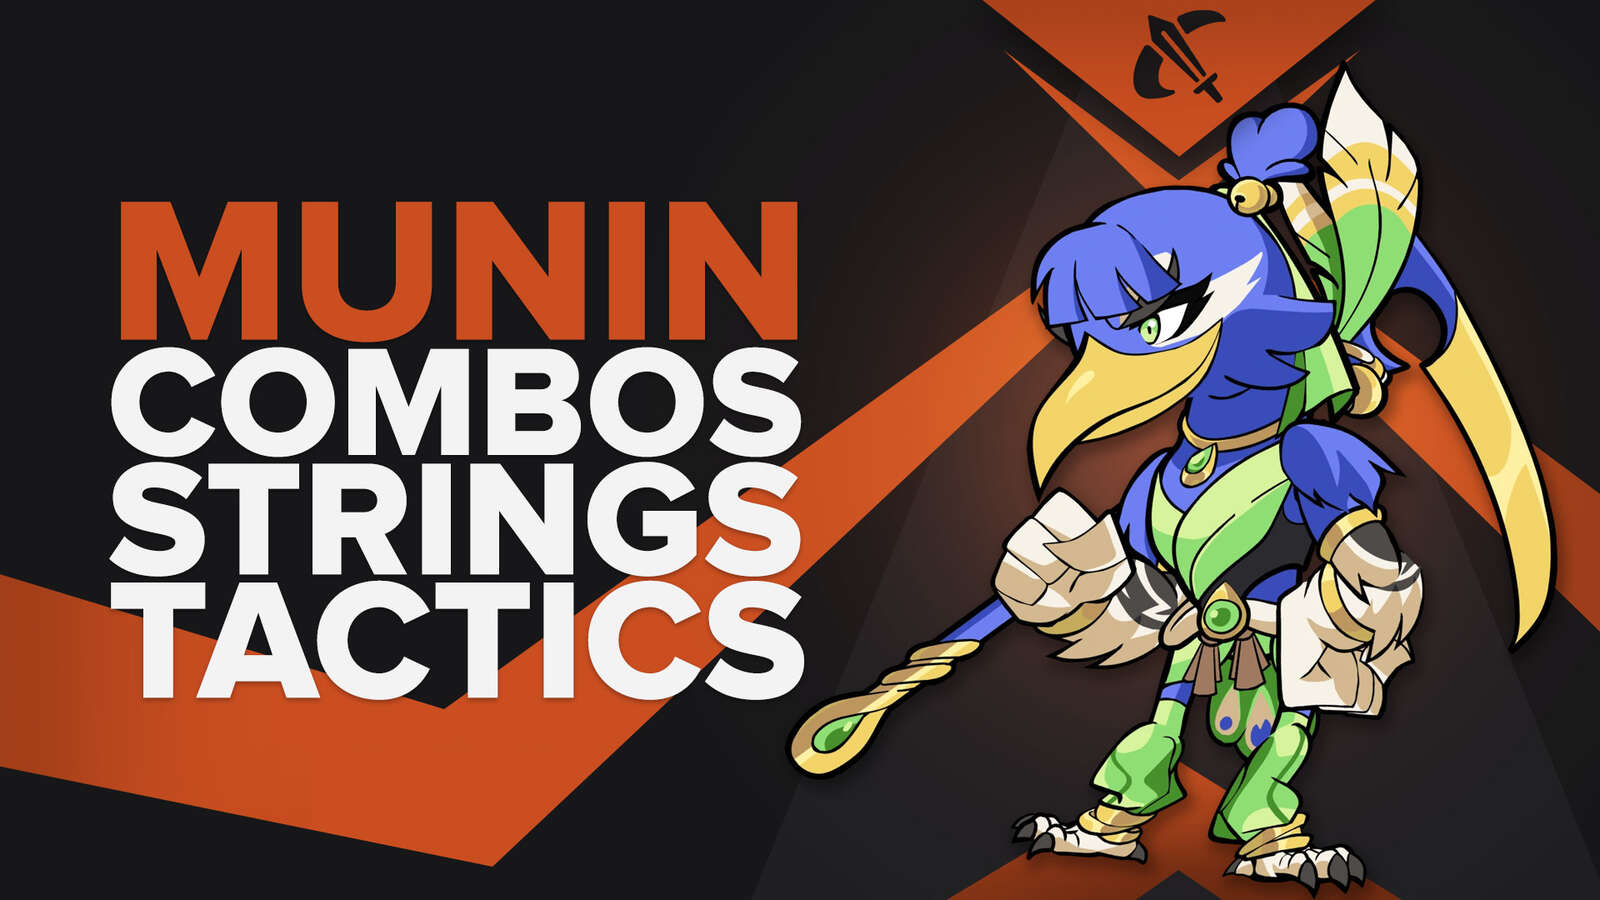 Best Munin combos, strings and tips in Brawlhalla